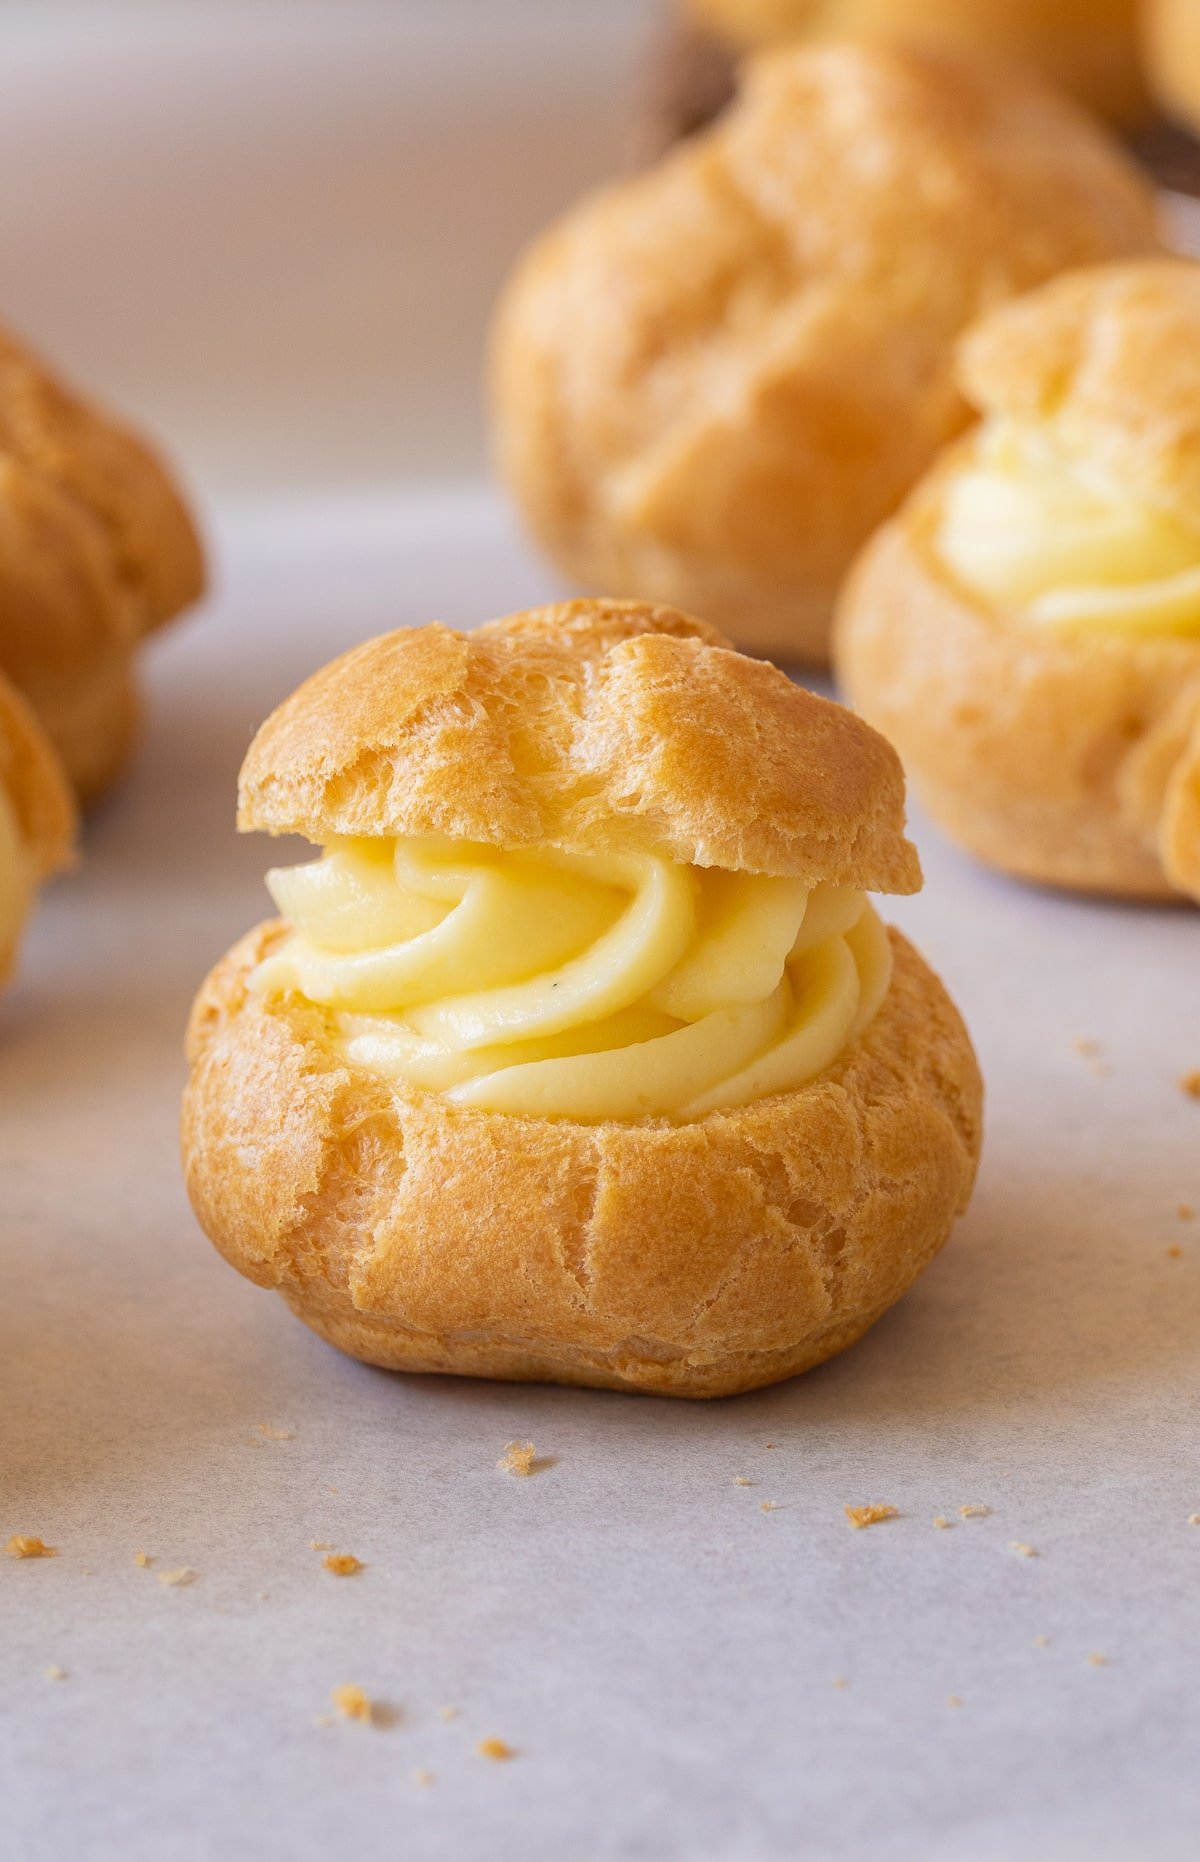 cream puff filled with pastry cream up close.